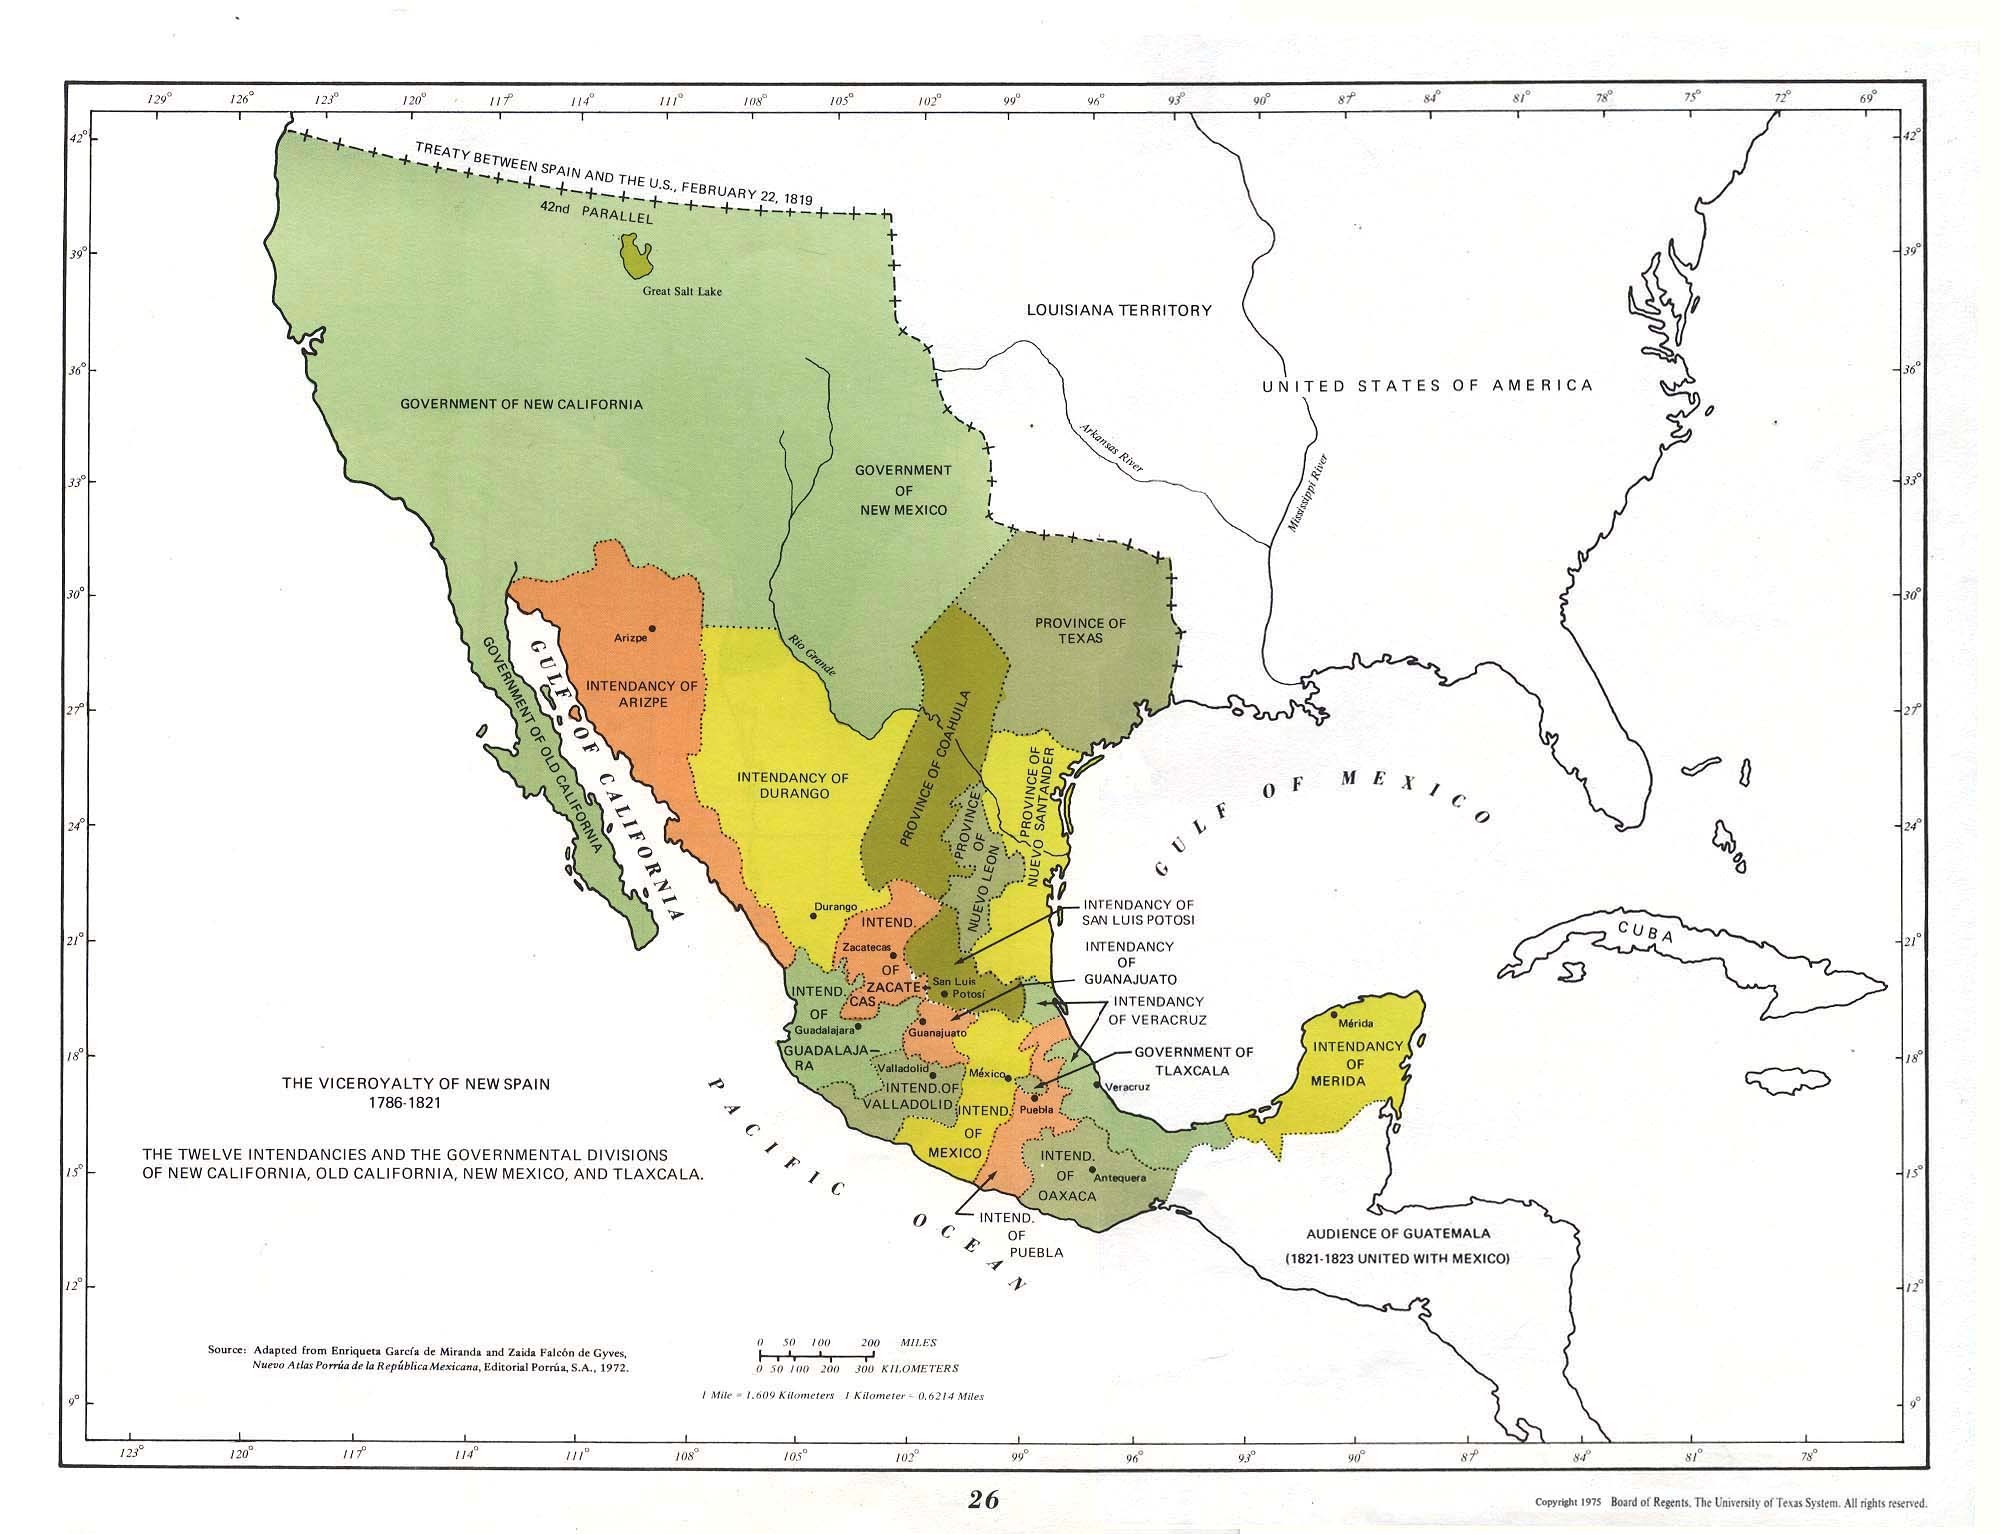 map of new spain